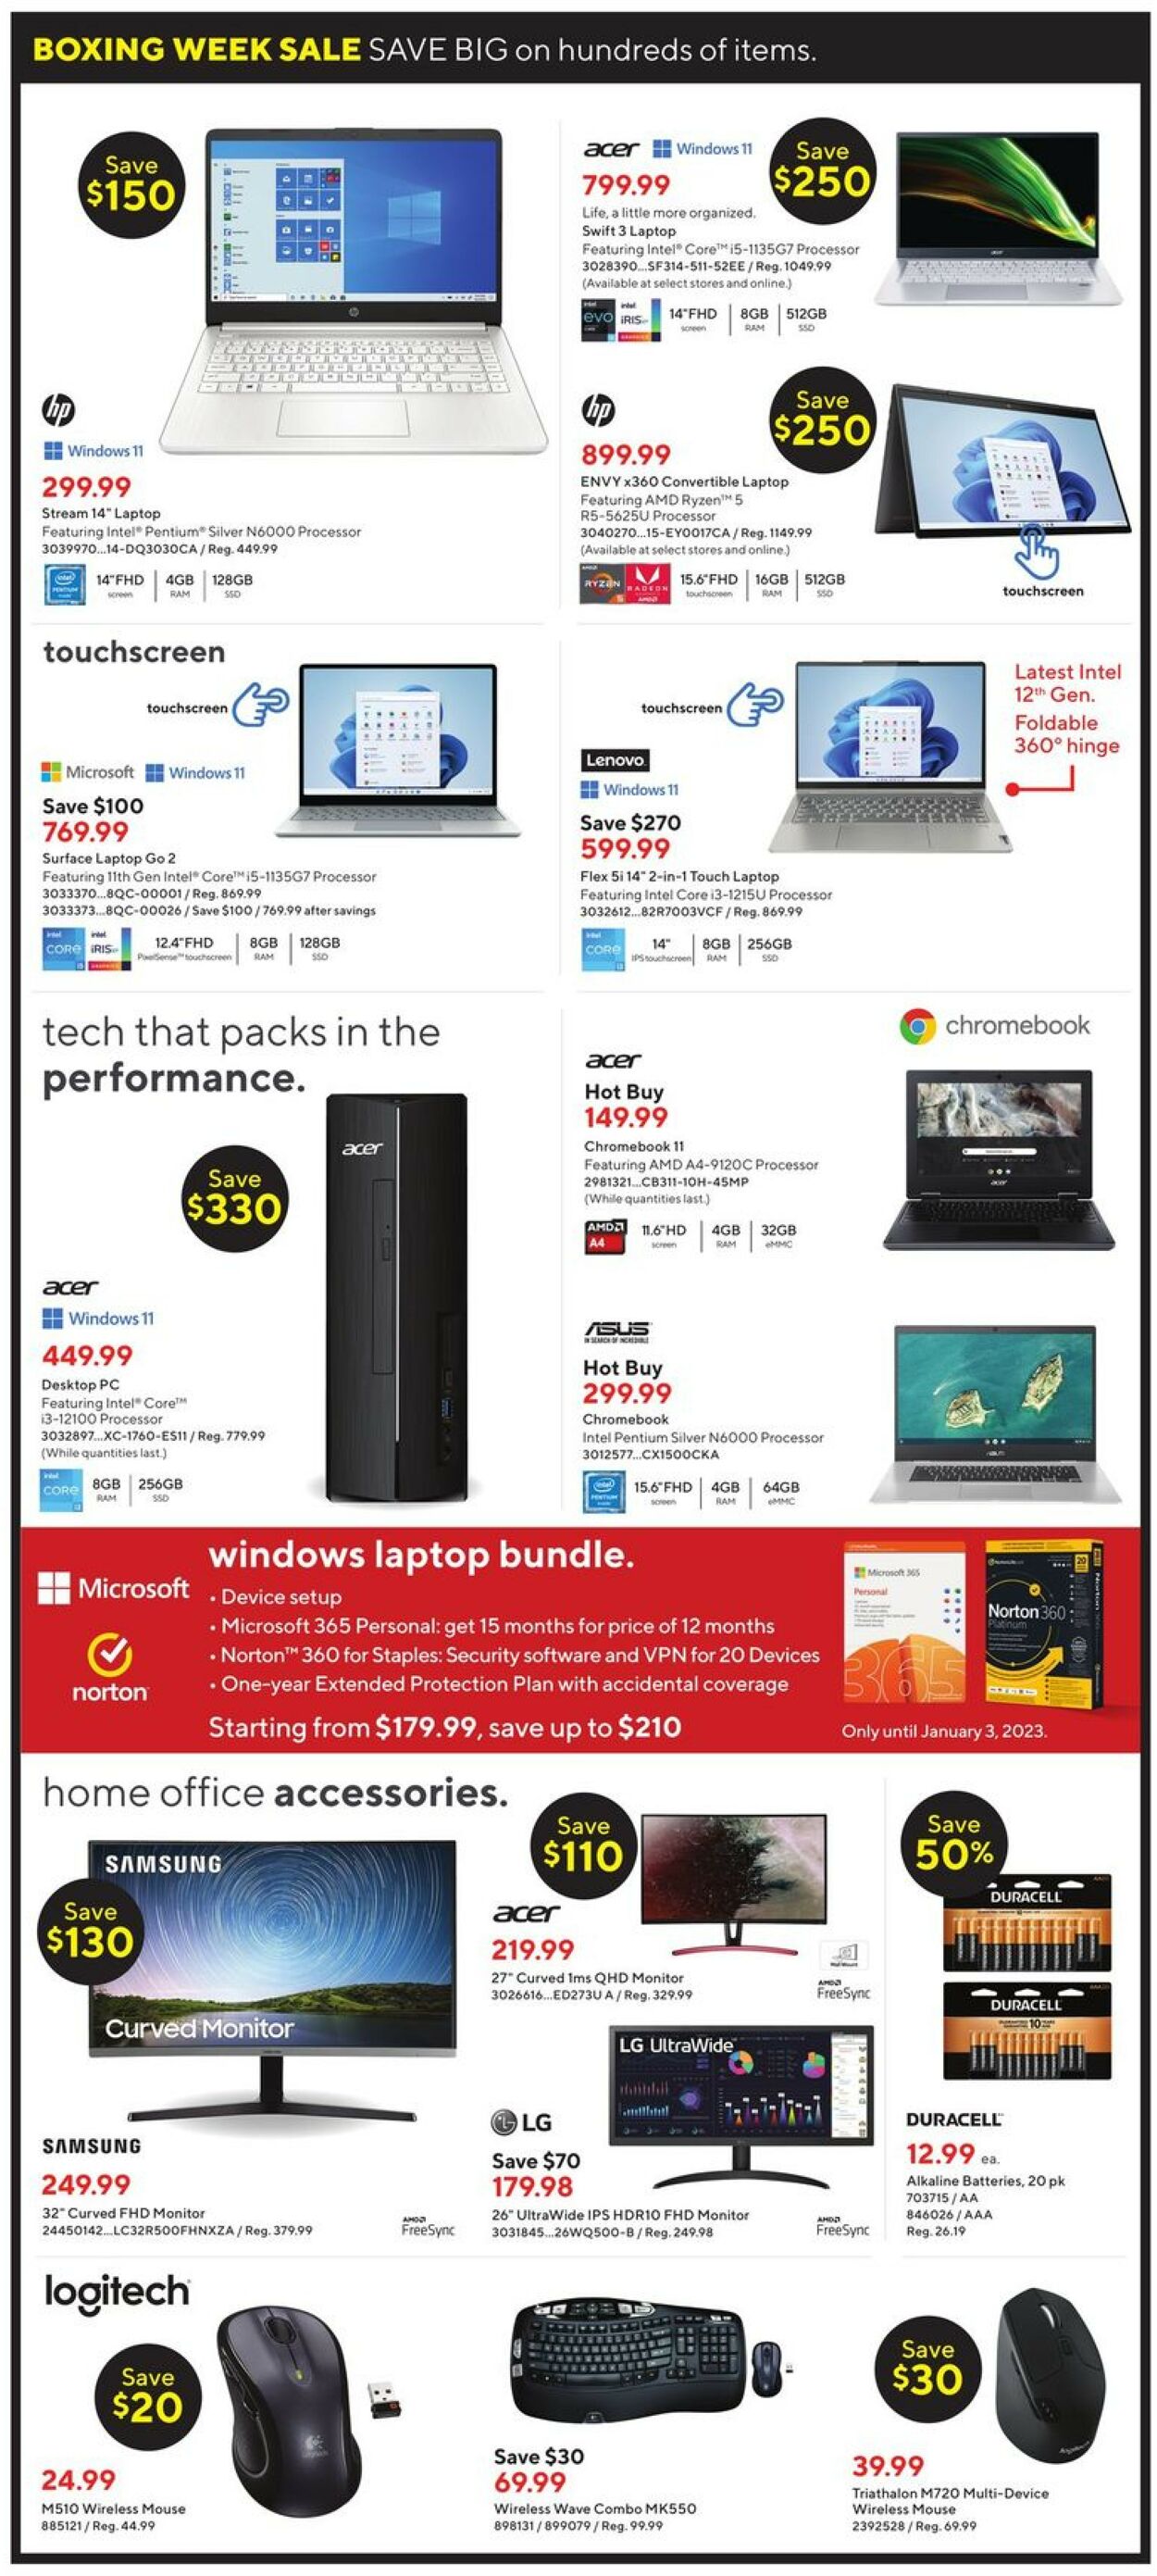 Staples Flyer from 12/25/2022